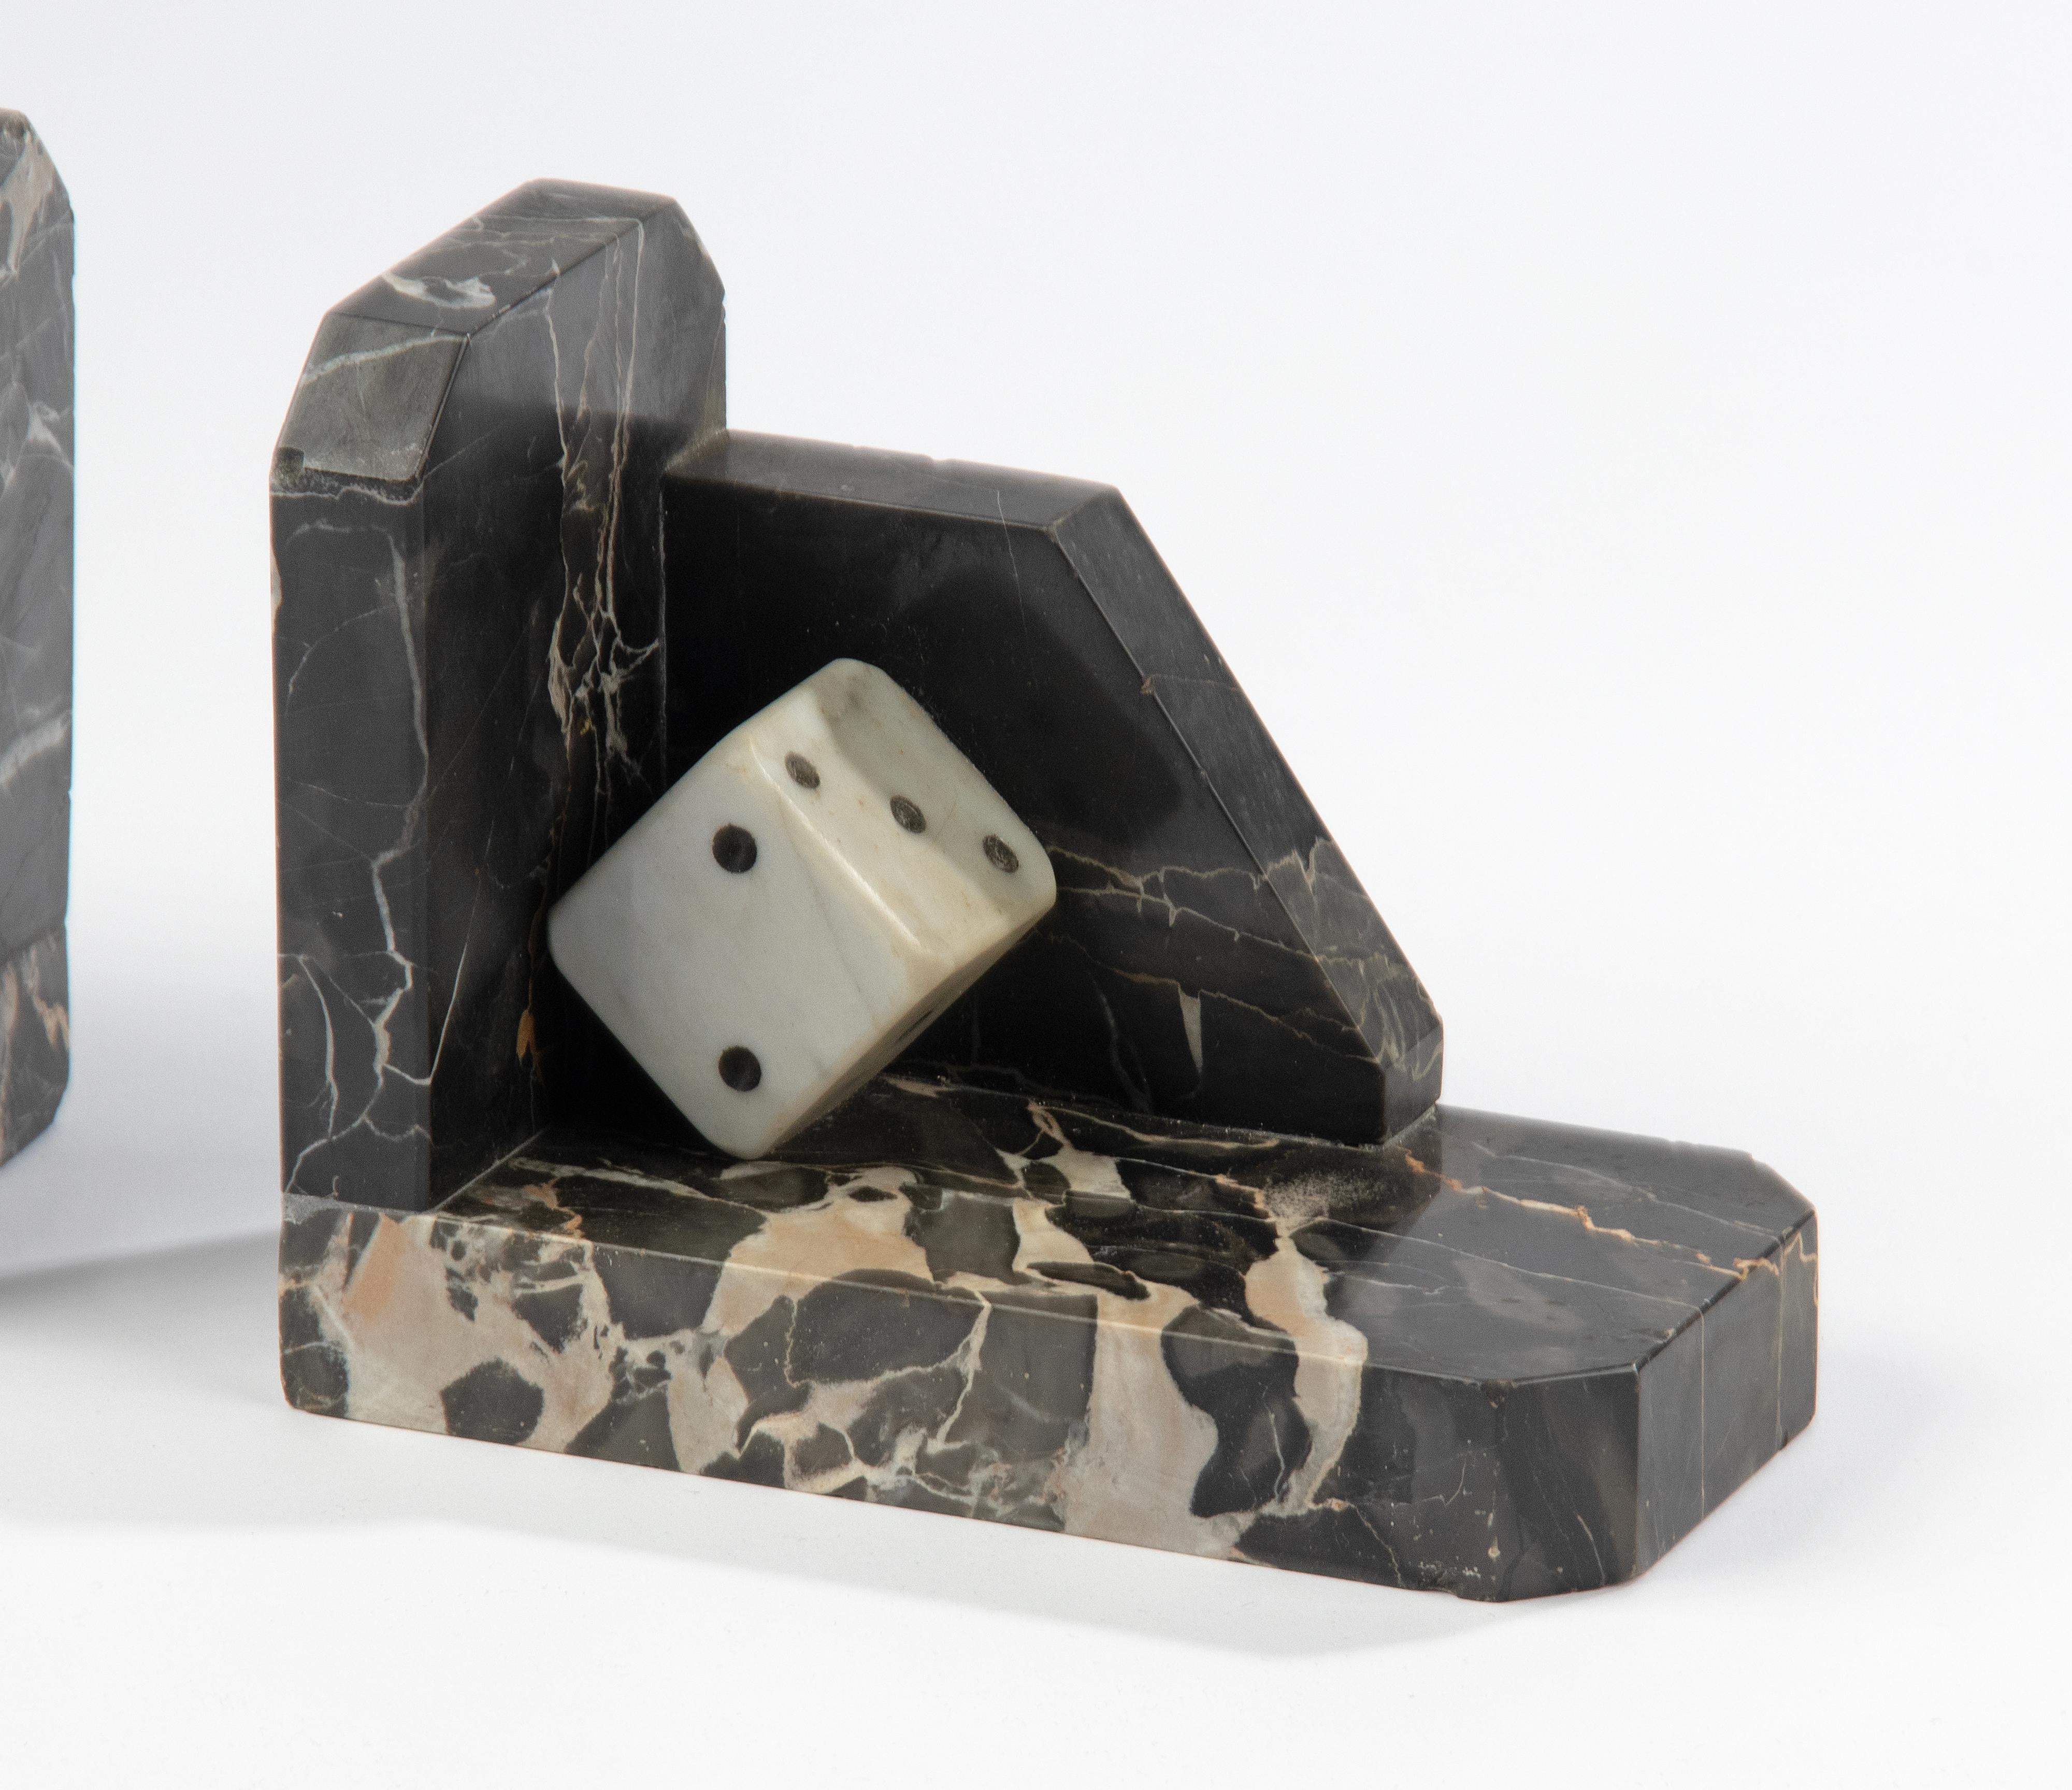 A pair of Art Deco period bookends with dice, made of Port Nero Marble, the dice are made of white Carrara marble. It is a decorative piece for on a desk or in the bookcase. Made in France around 1920-1920. Overall in good condition. Some tiny (old)